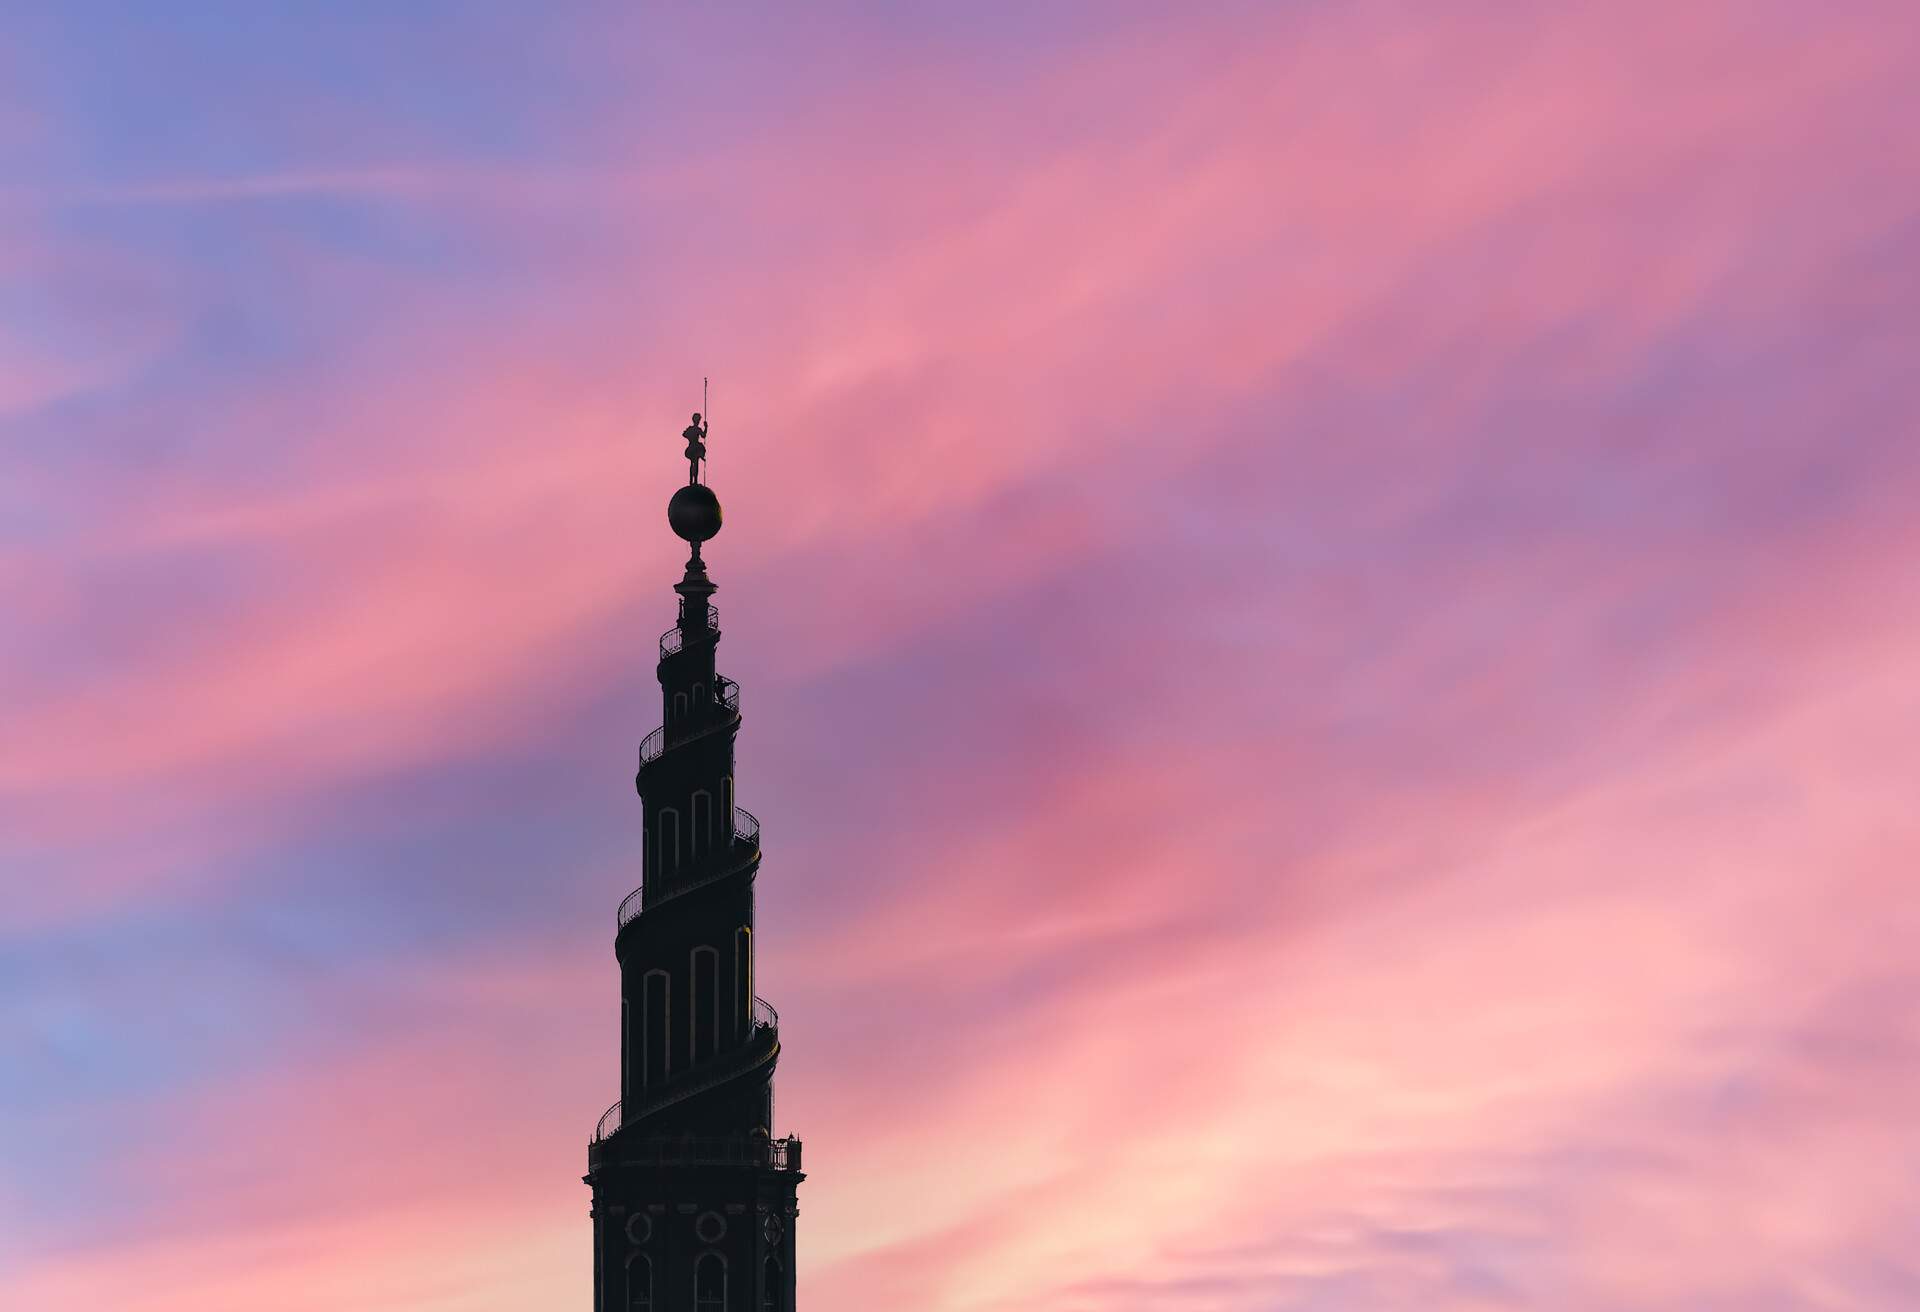 Large church spire silhouette on a colorful evening sky.